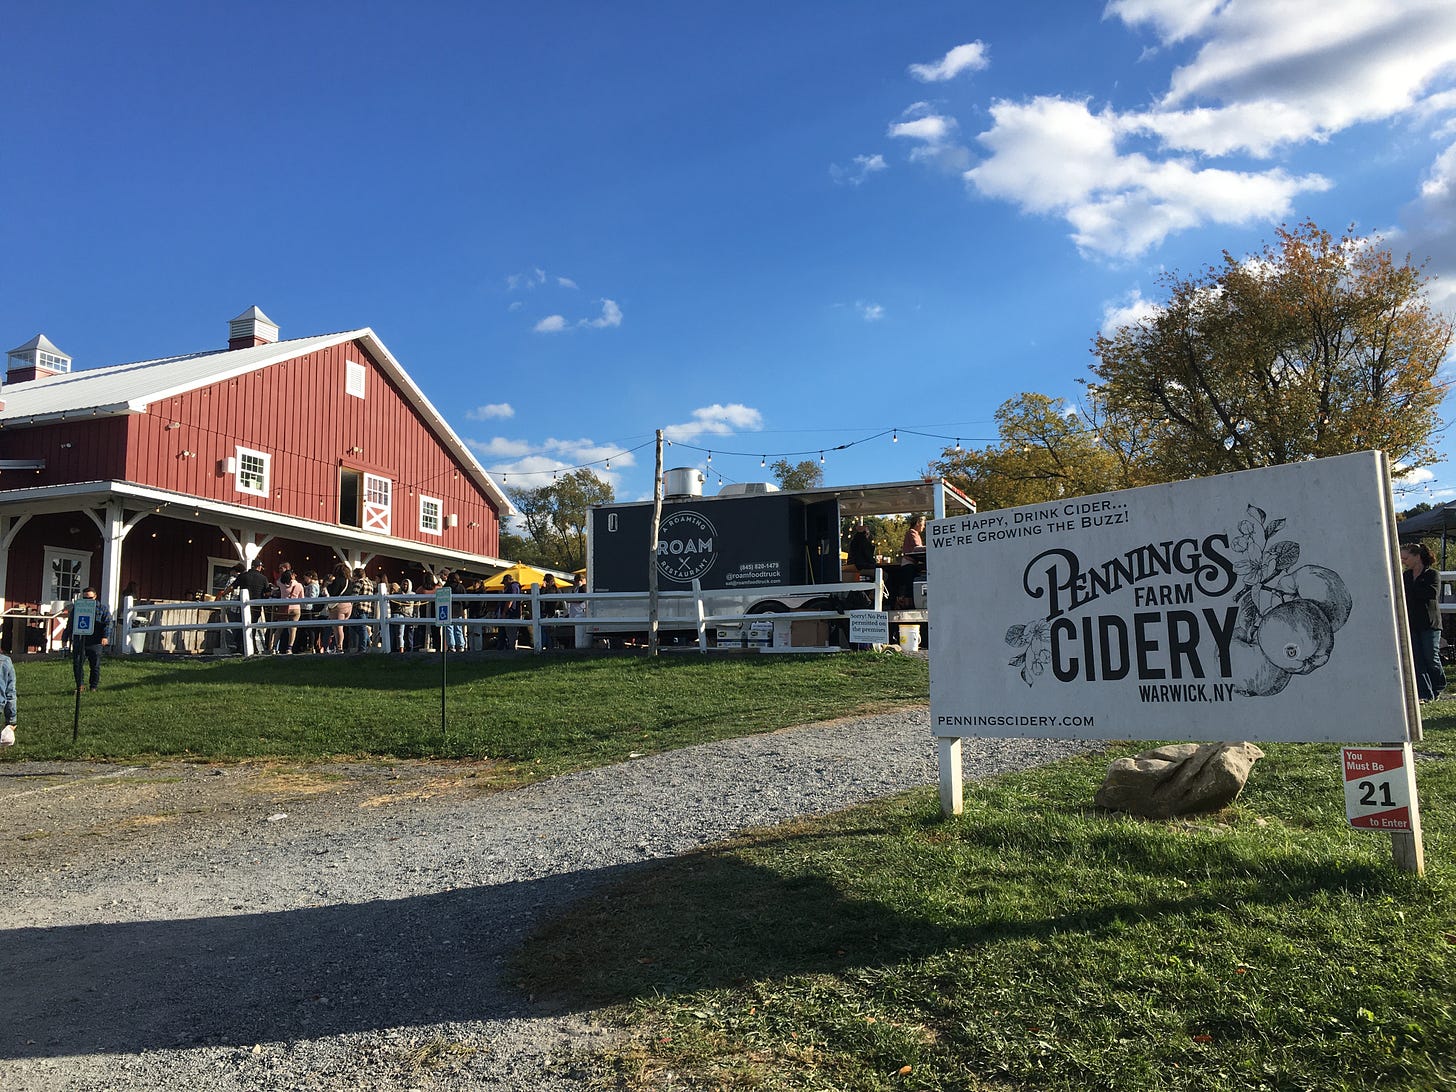 A gravel road leads to a big red barn atop a hill. The sky is blue and there are white puffy clouds in the sky. A large white sign with black letters reads "Penning Farm Cidery"